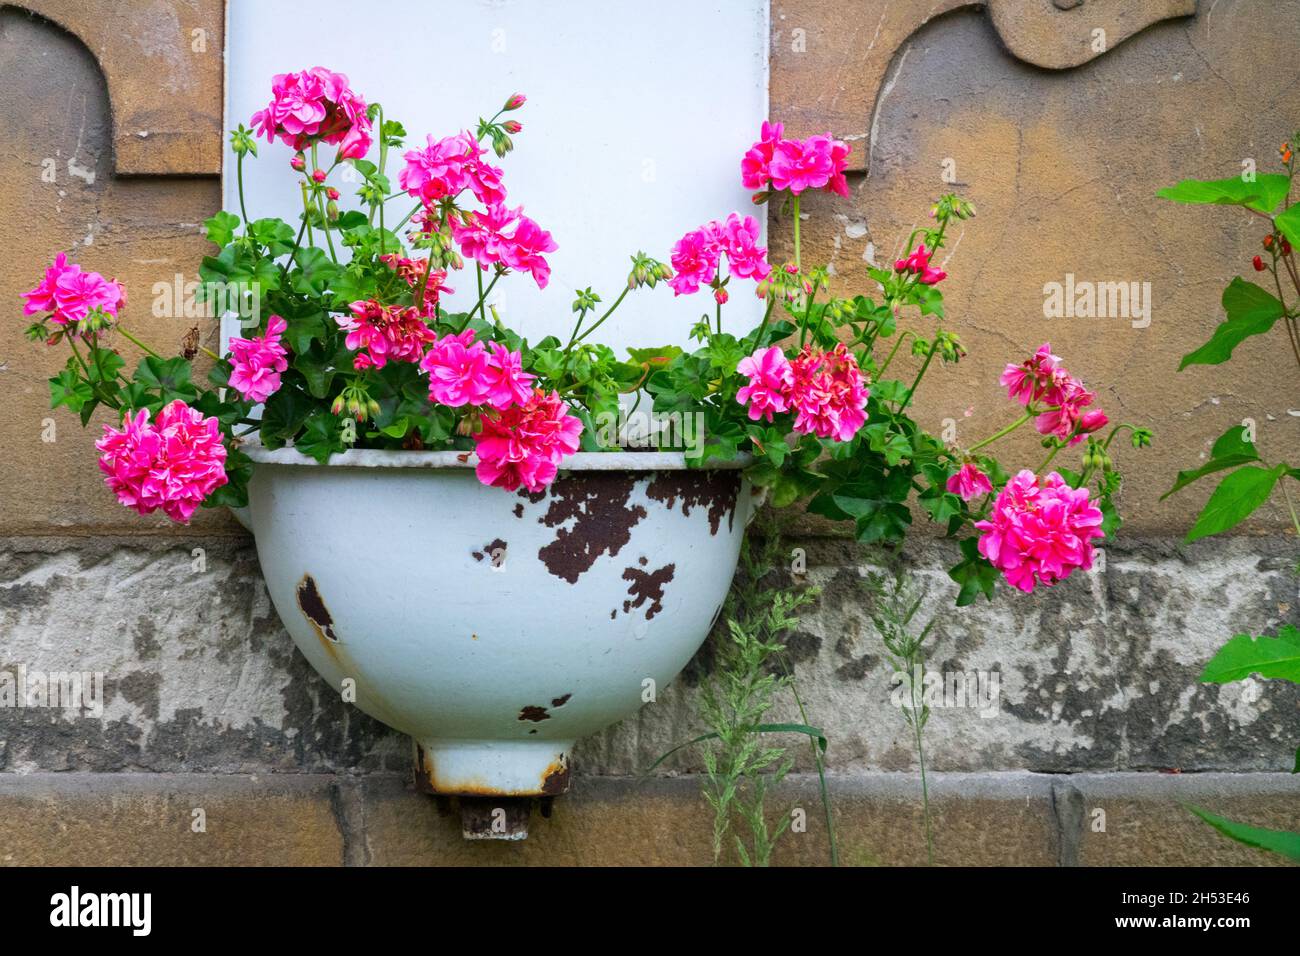 Pink geraniums grow in old cast iron sink Stock Photo